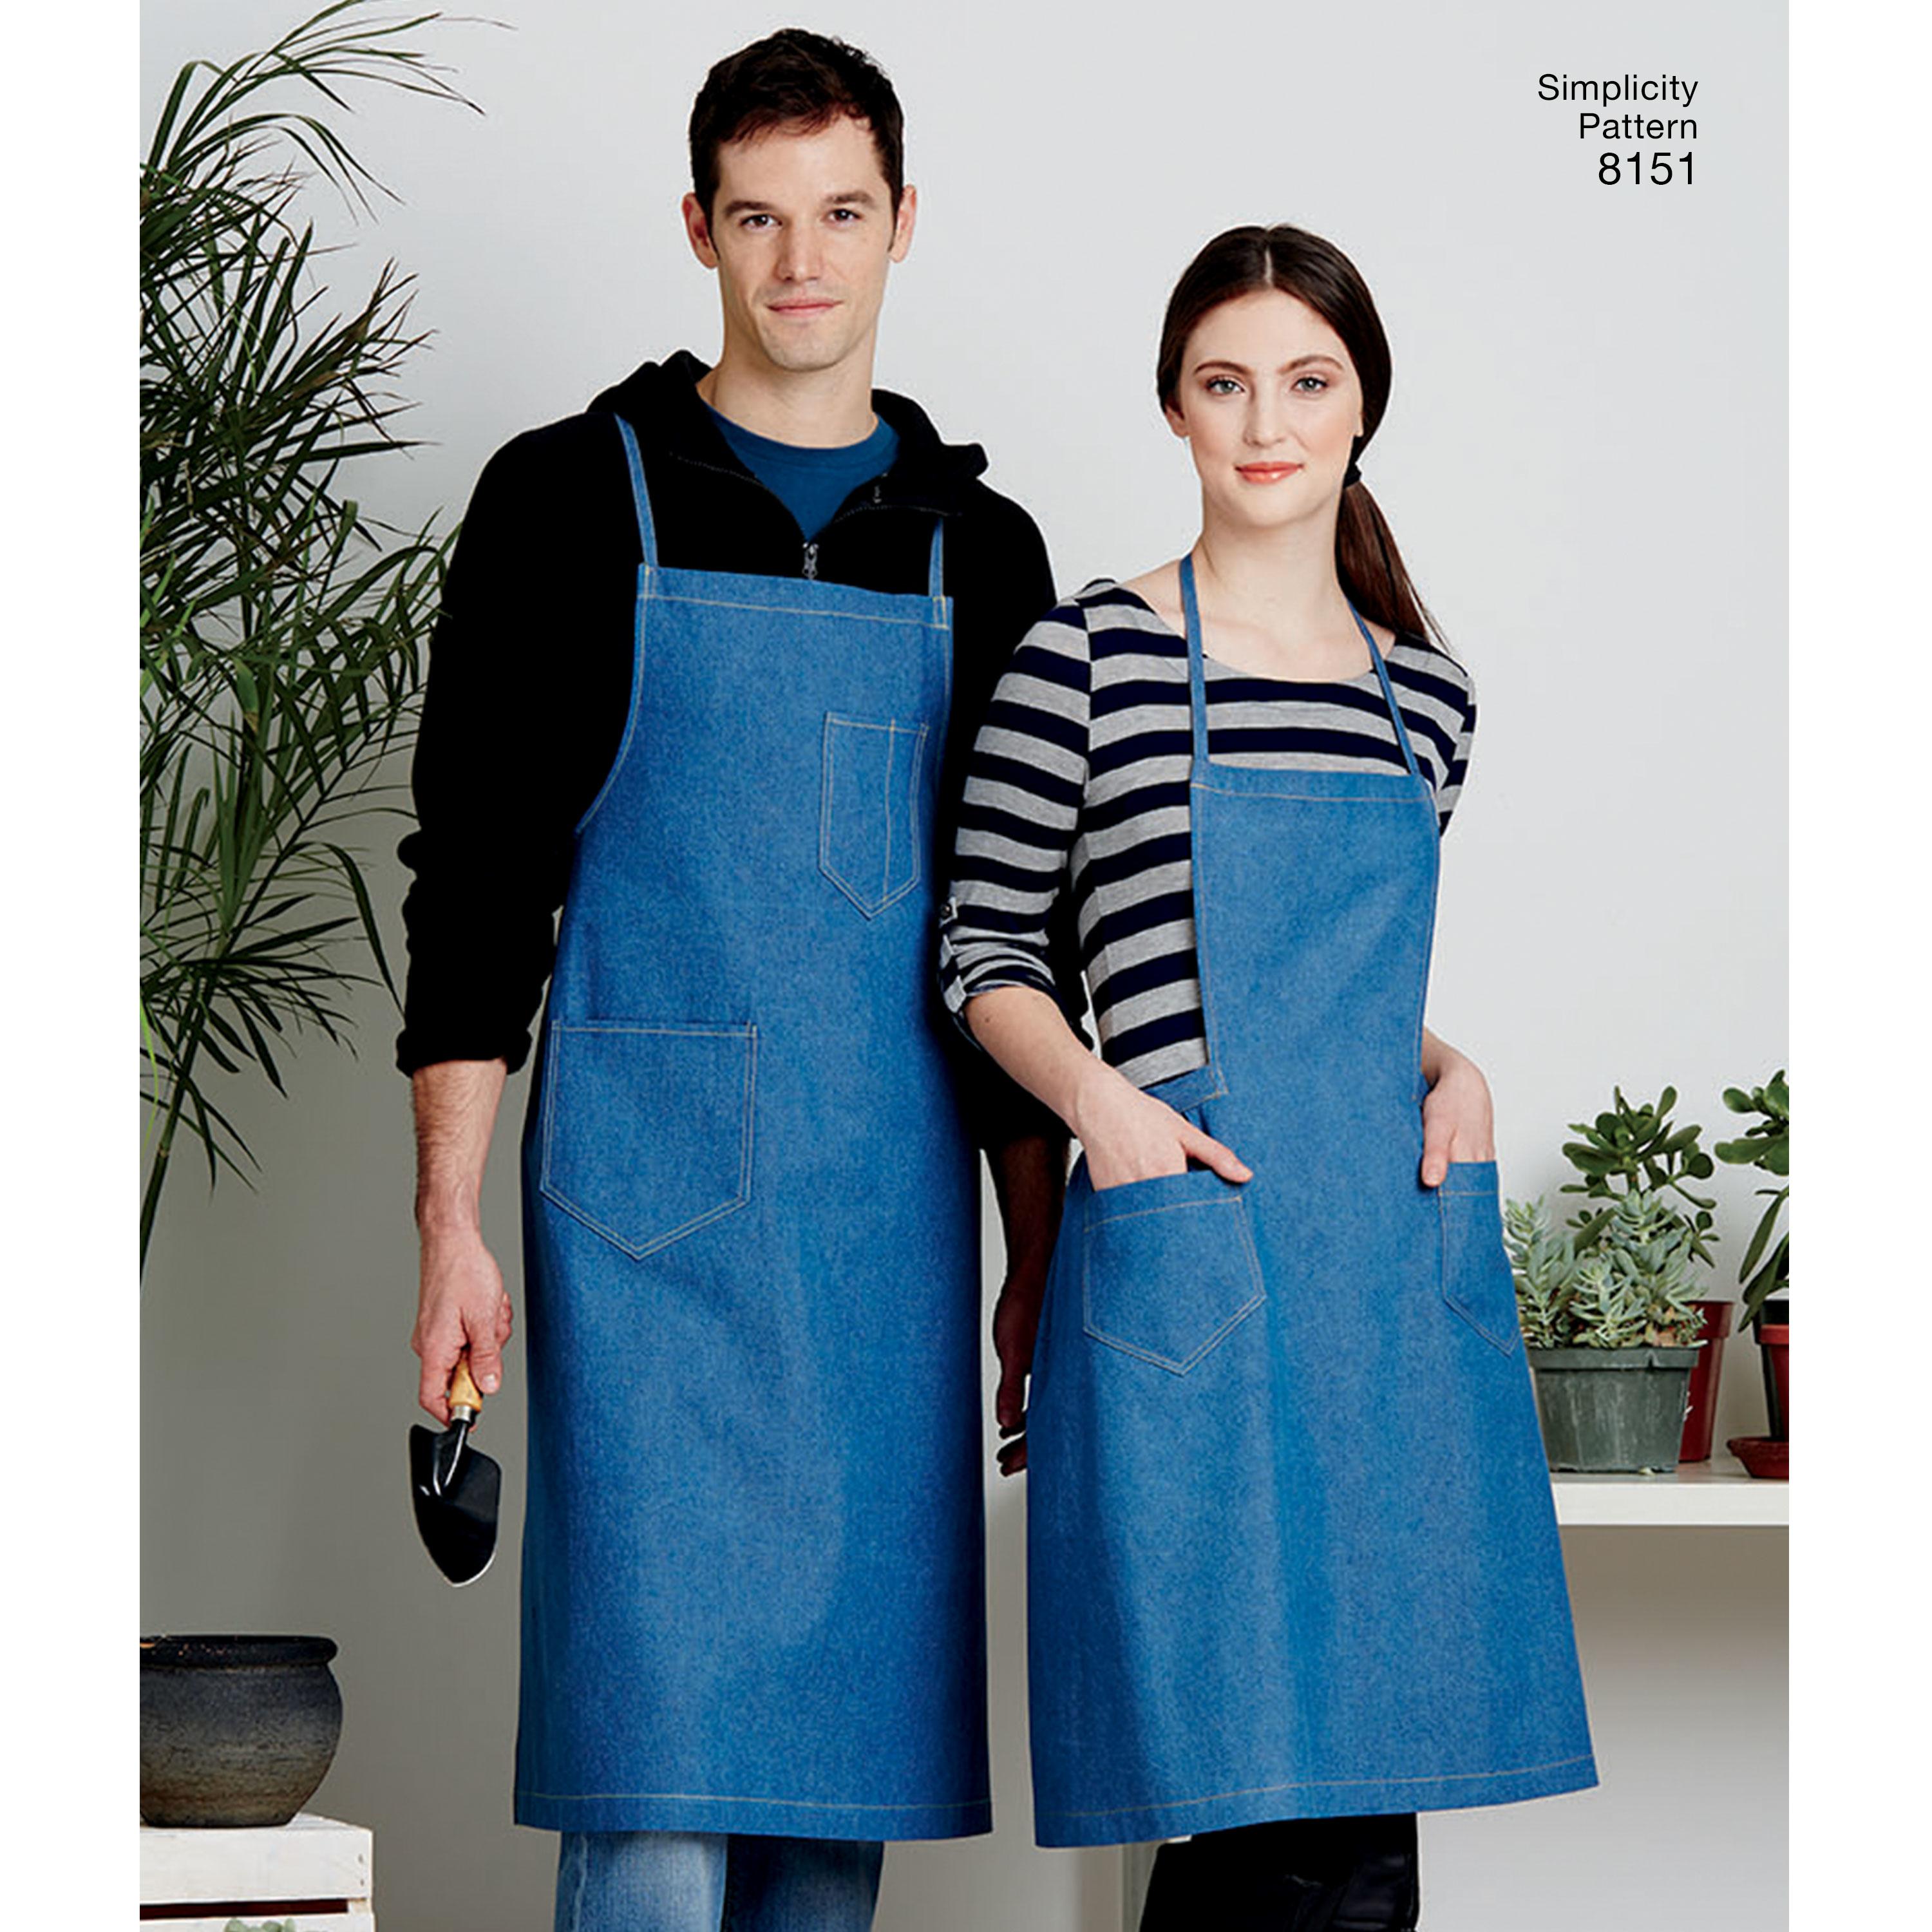 Simplicity S8151 Vintage Aprons for Boys, Girls, Women's and Men